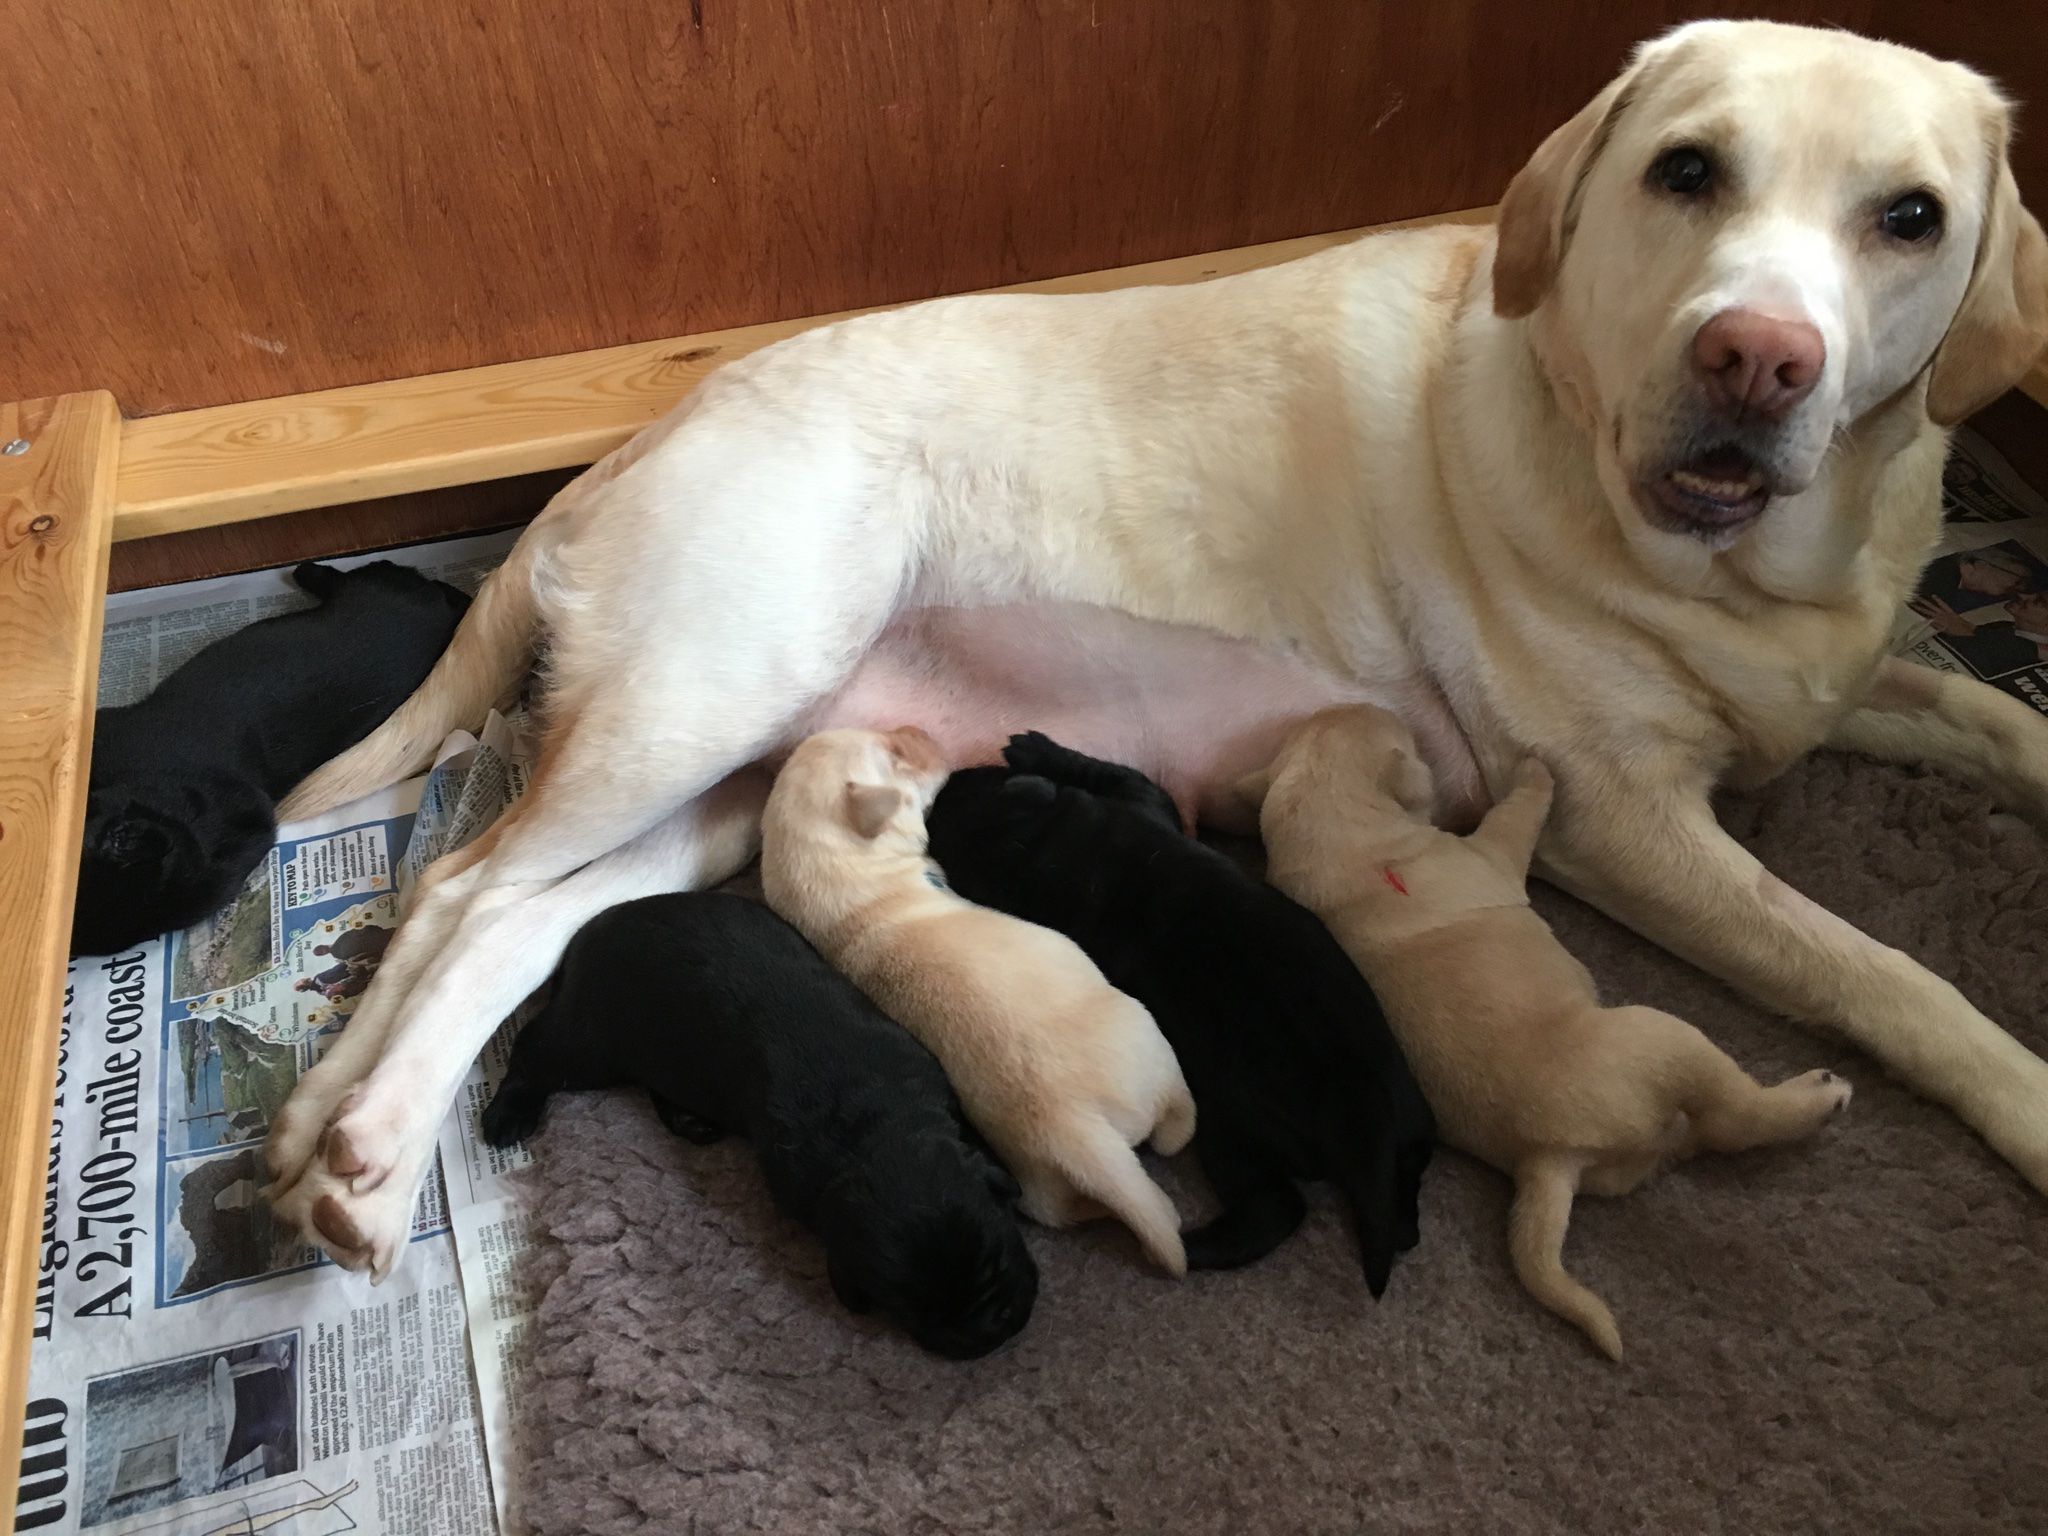 Connie with her puppies